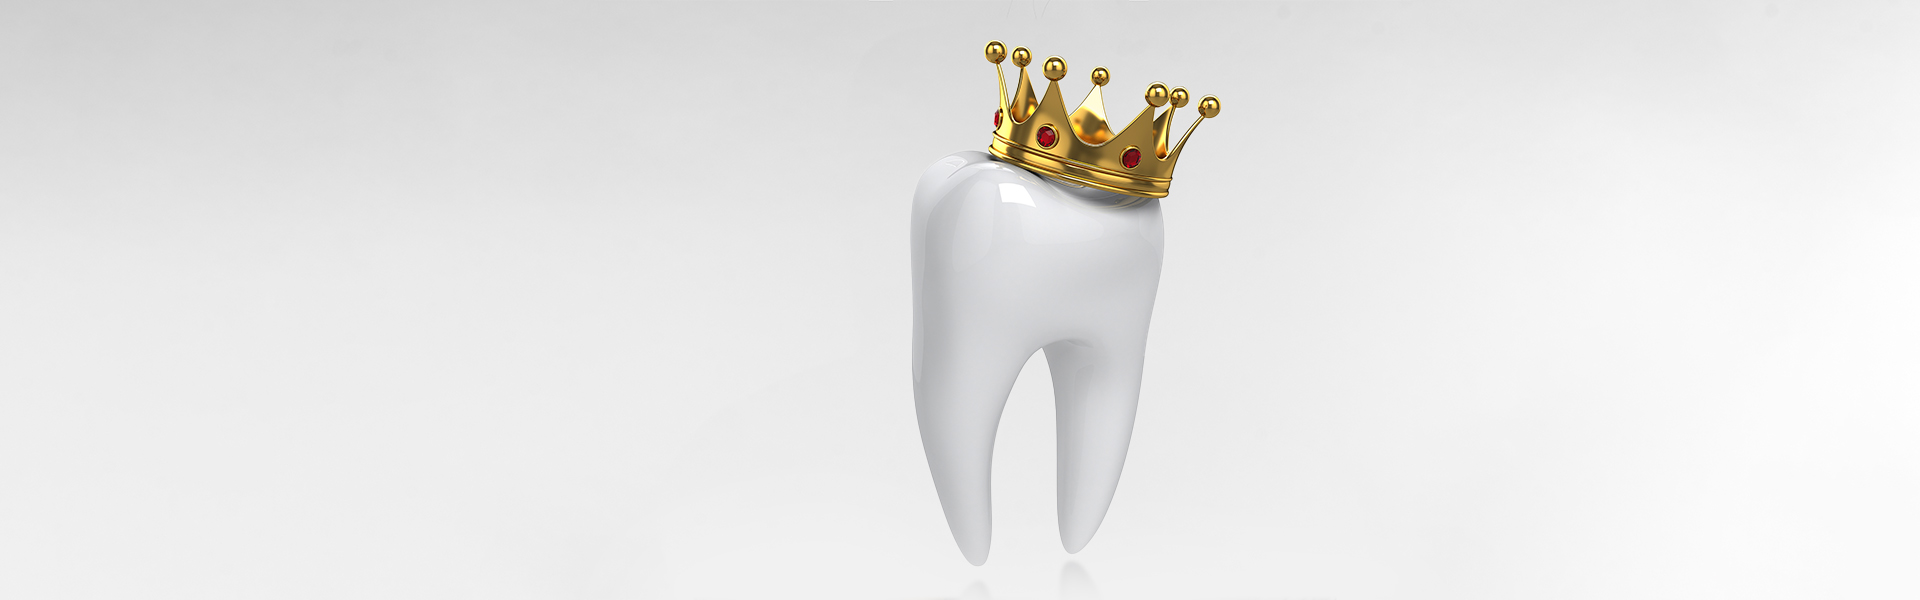 6 Ways to Improve Your Smile With Dental Crowns